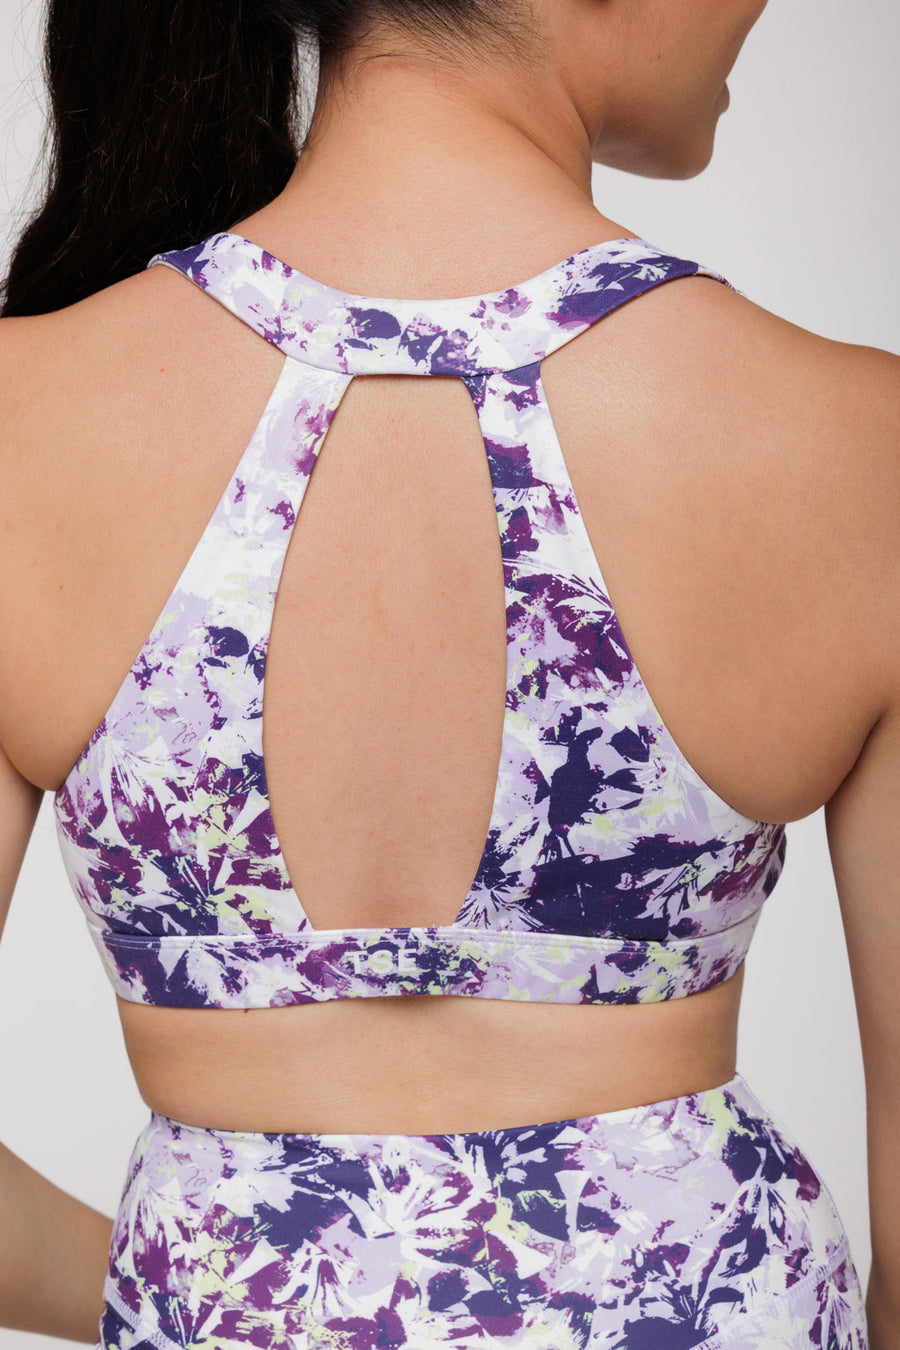 BRASSIERE TWIST 2.0 STRONG BACK - BLOSSOM